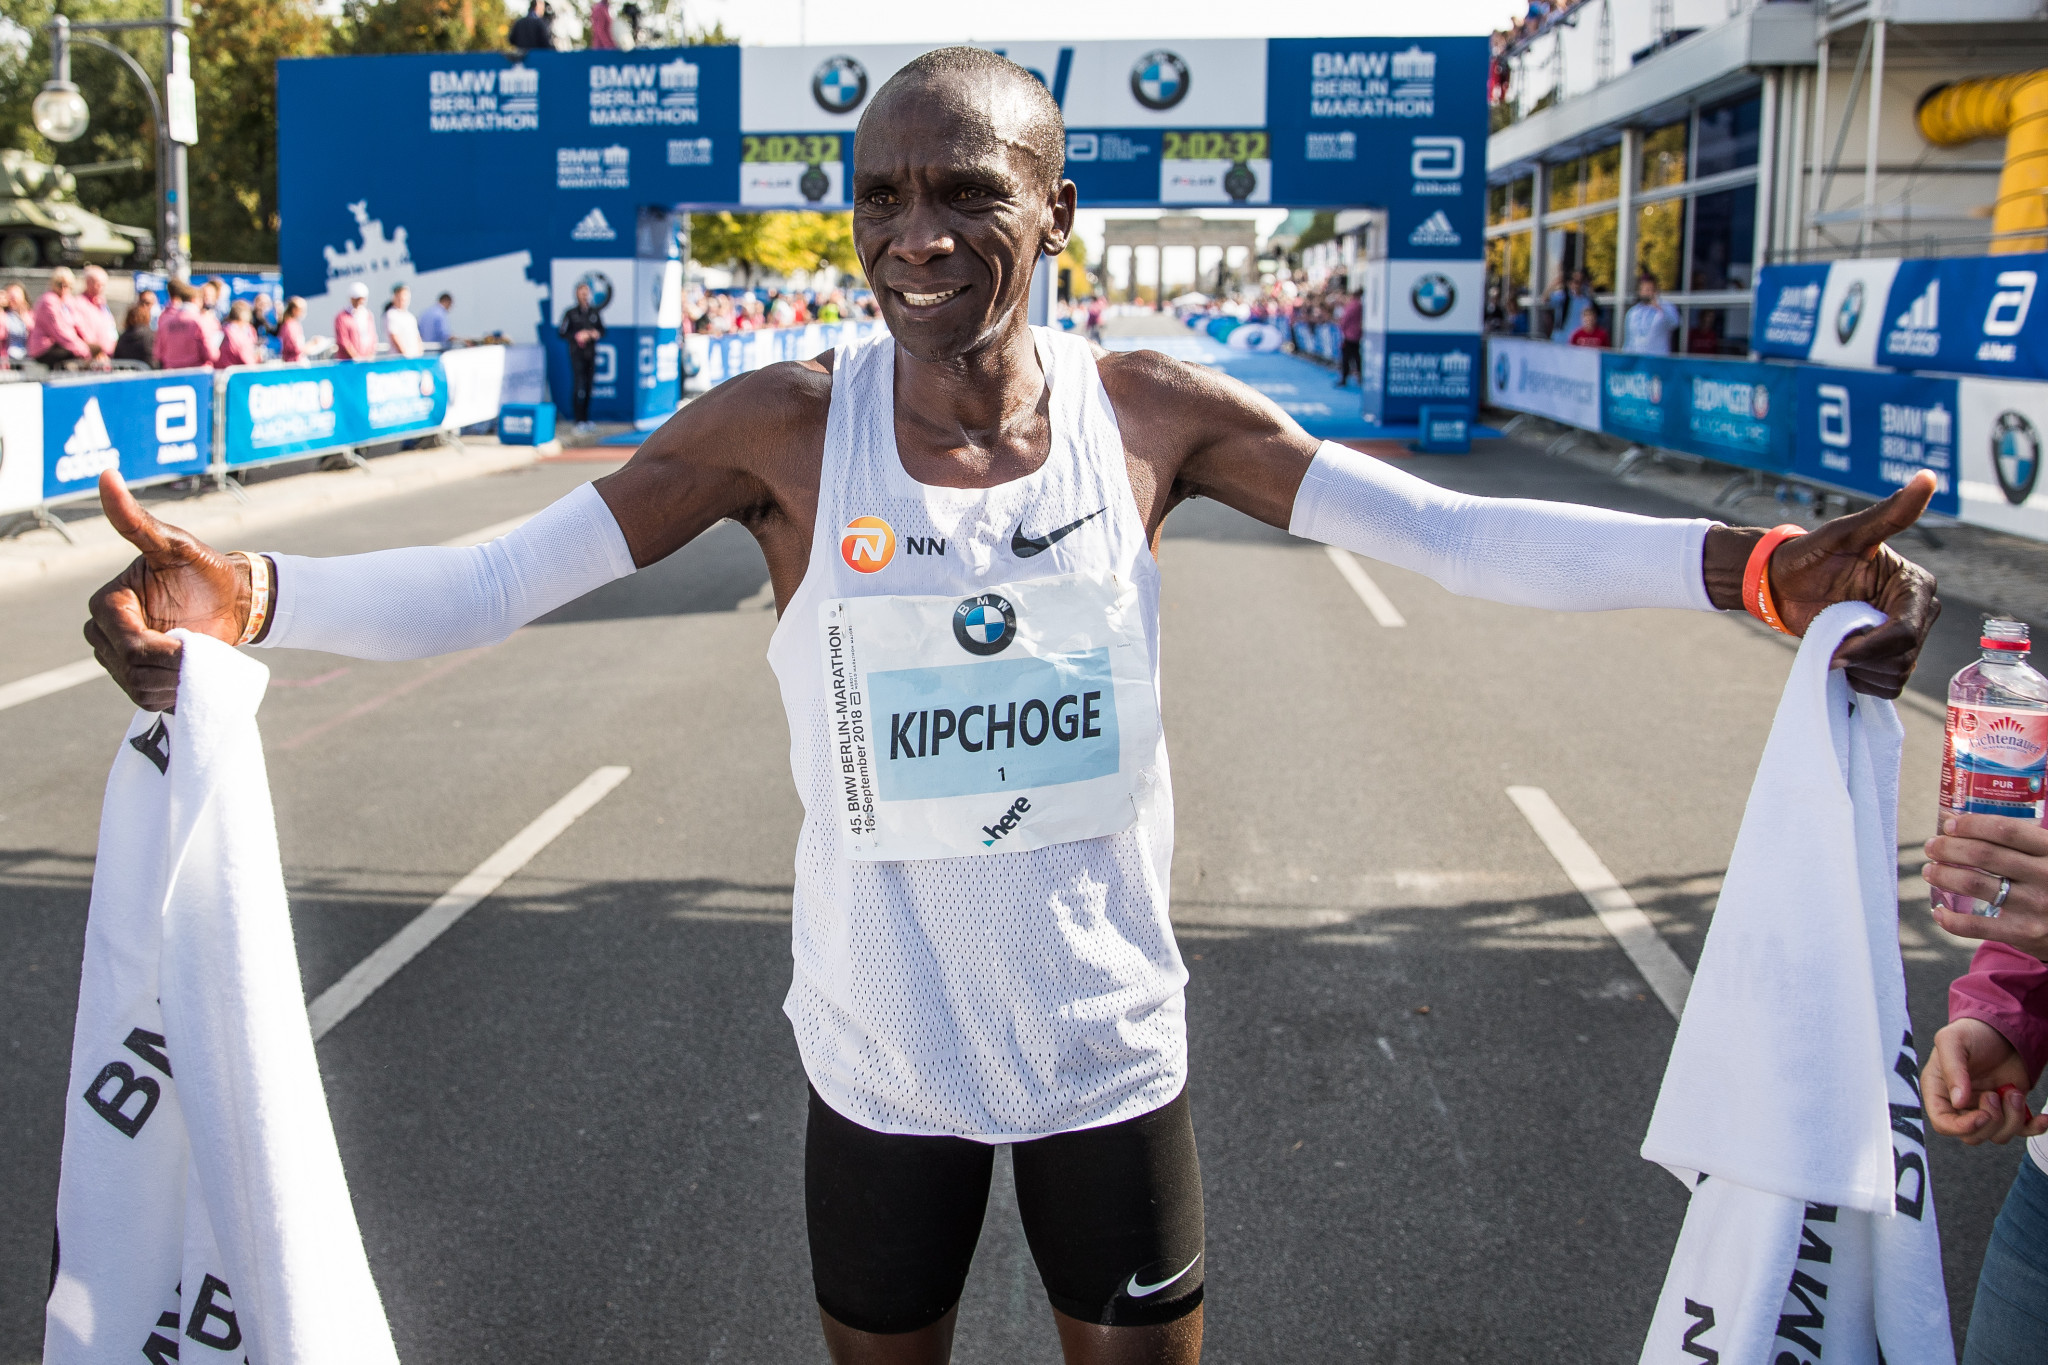 Eliud Kipchoge of Kenya celebrates as he wins the Berlin Marathon 2018 in a world record of 2:01:39 ©Getty Images